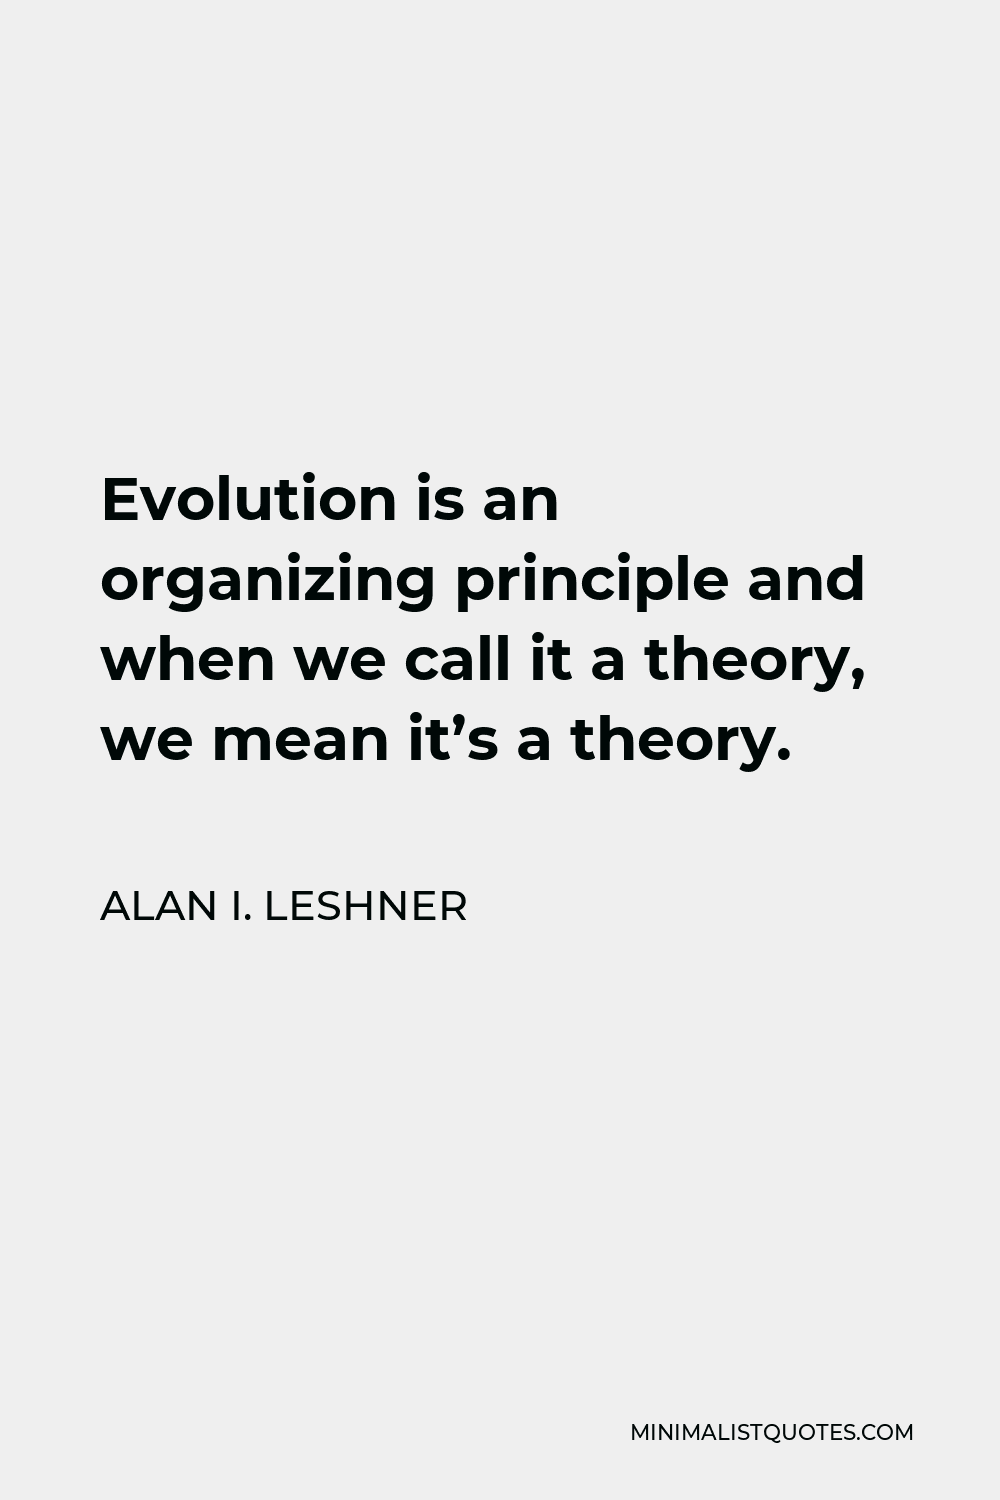 Alan I. Leshner Quote - Evolution is an organizing principle and when we call it a theory, we mean it’s a theory.